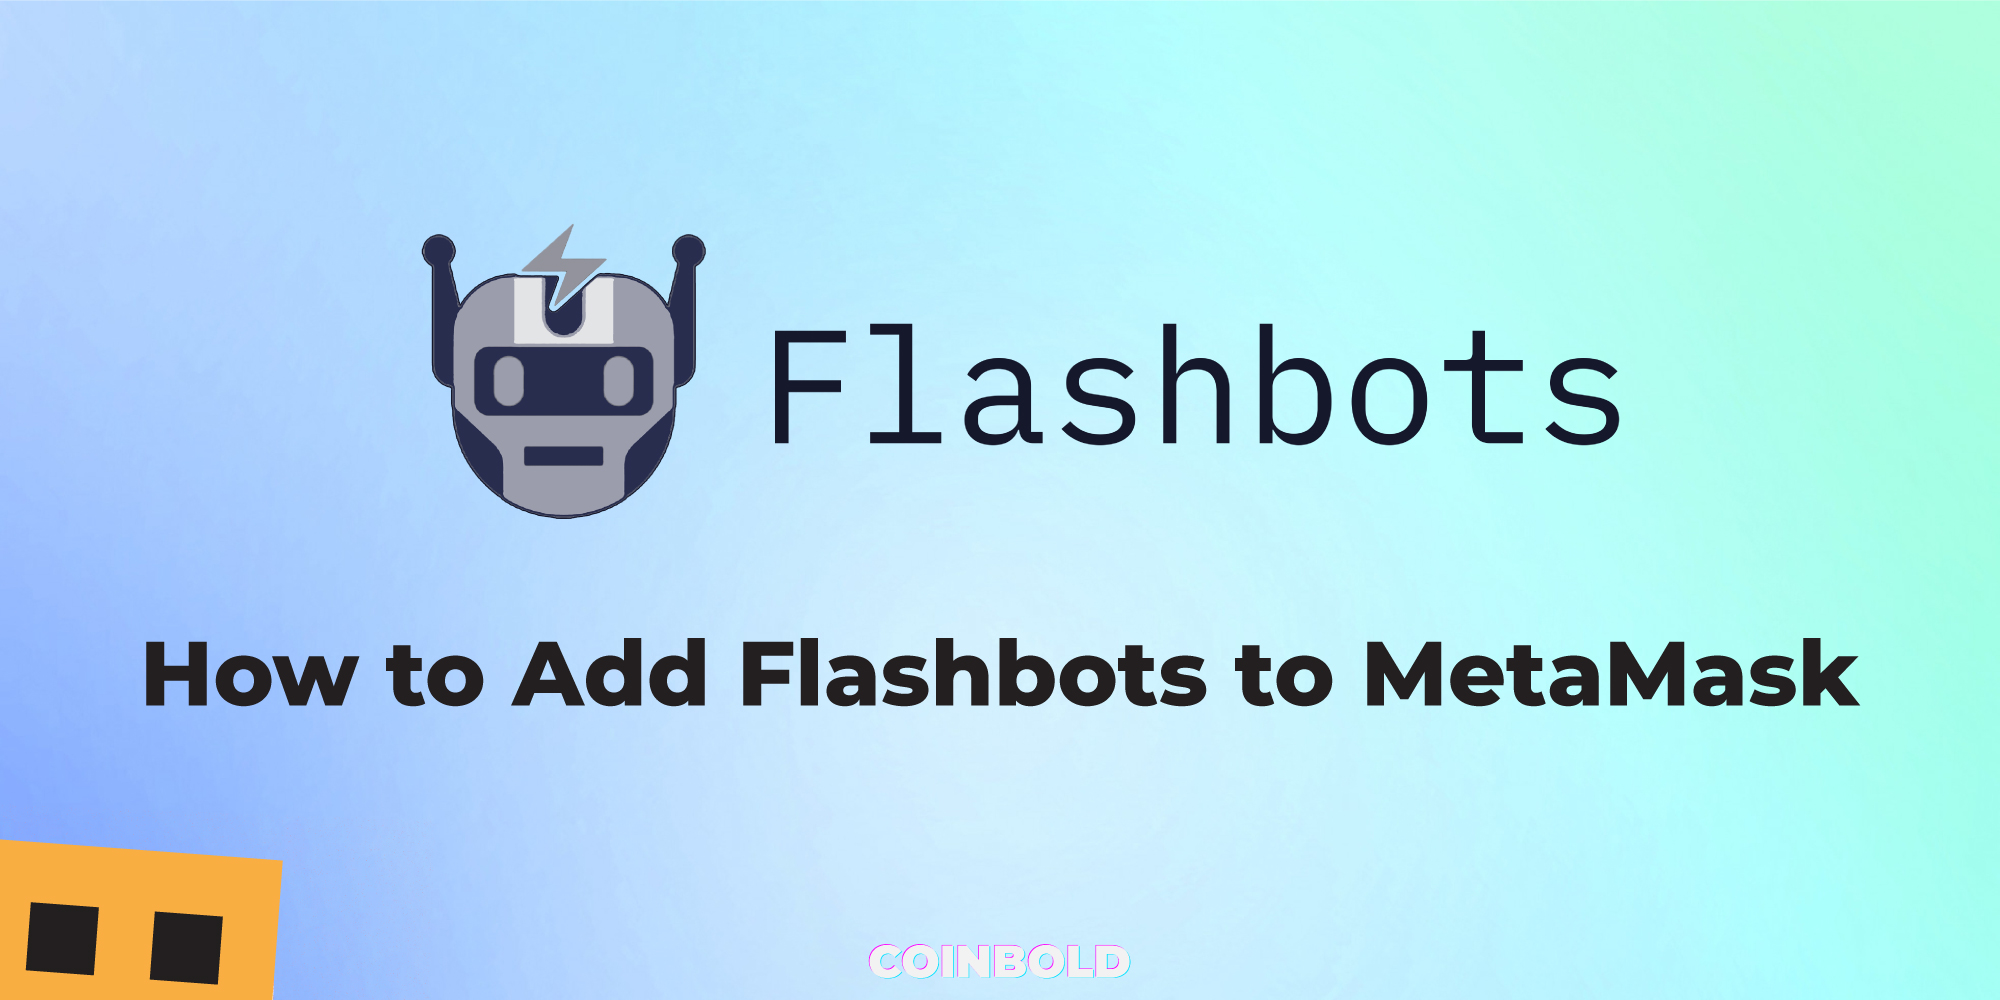 How to Add Flashbots to MetaMask